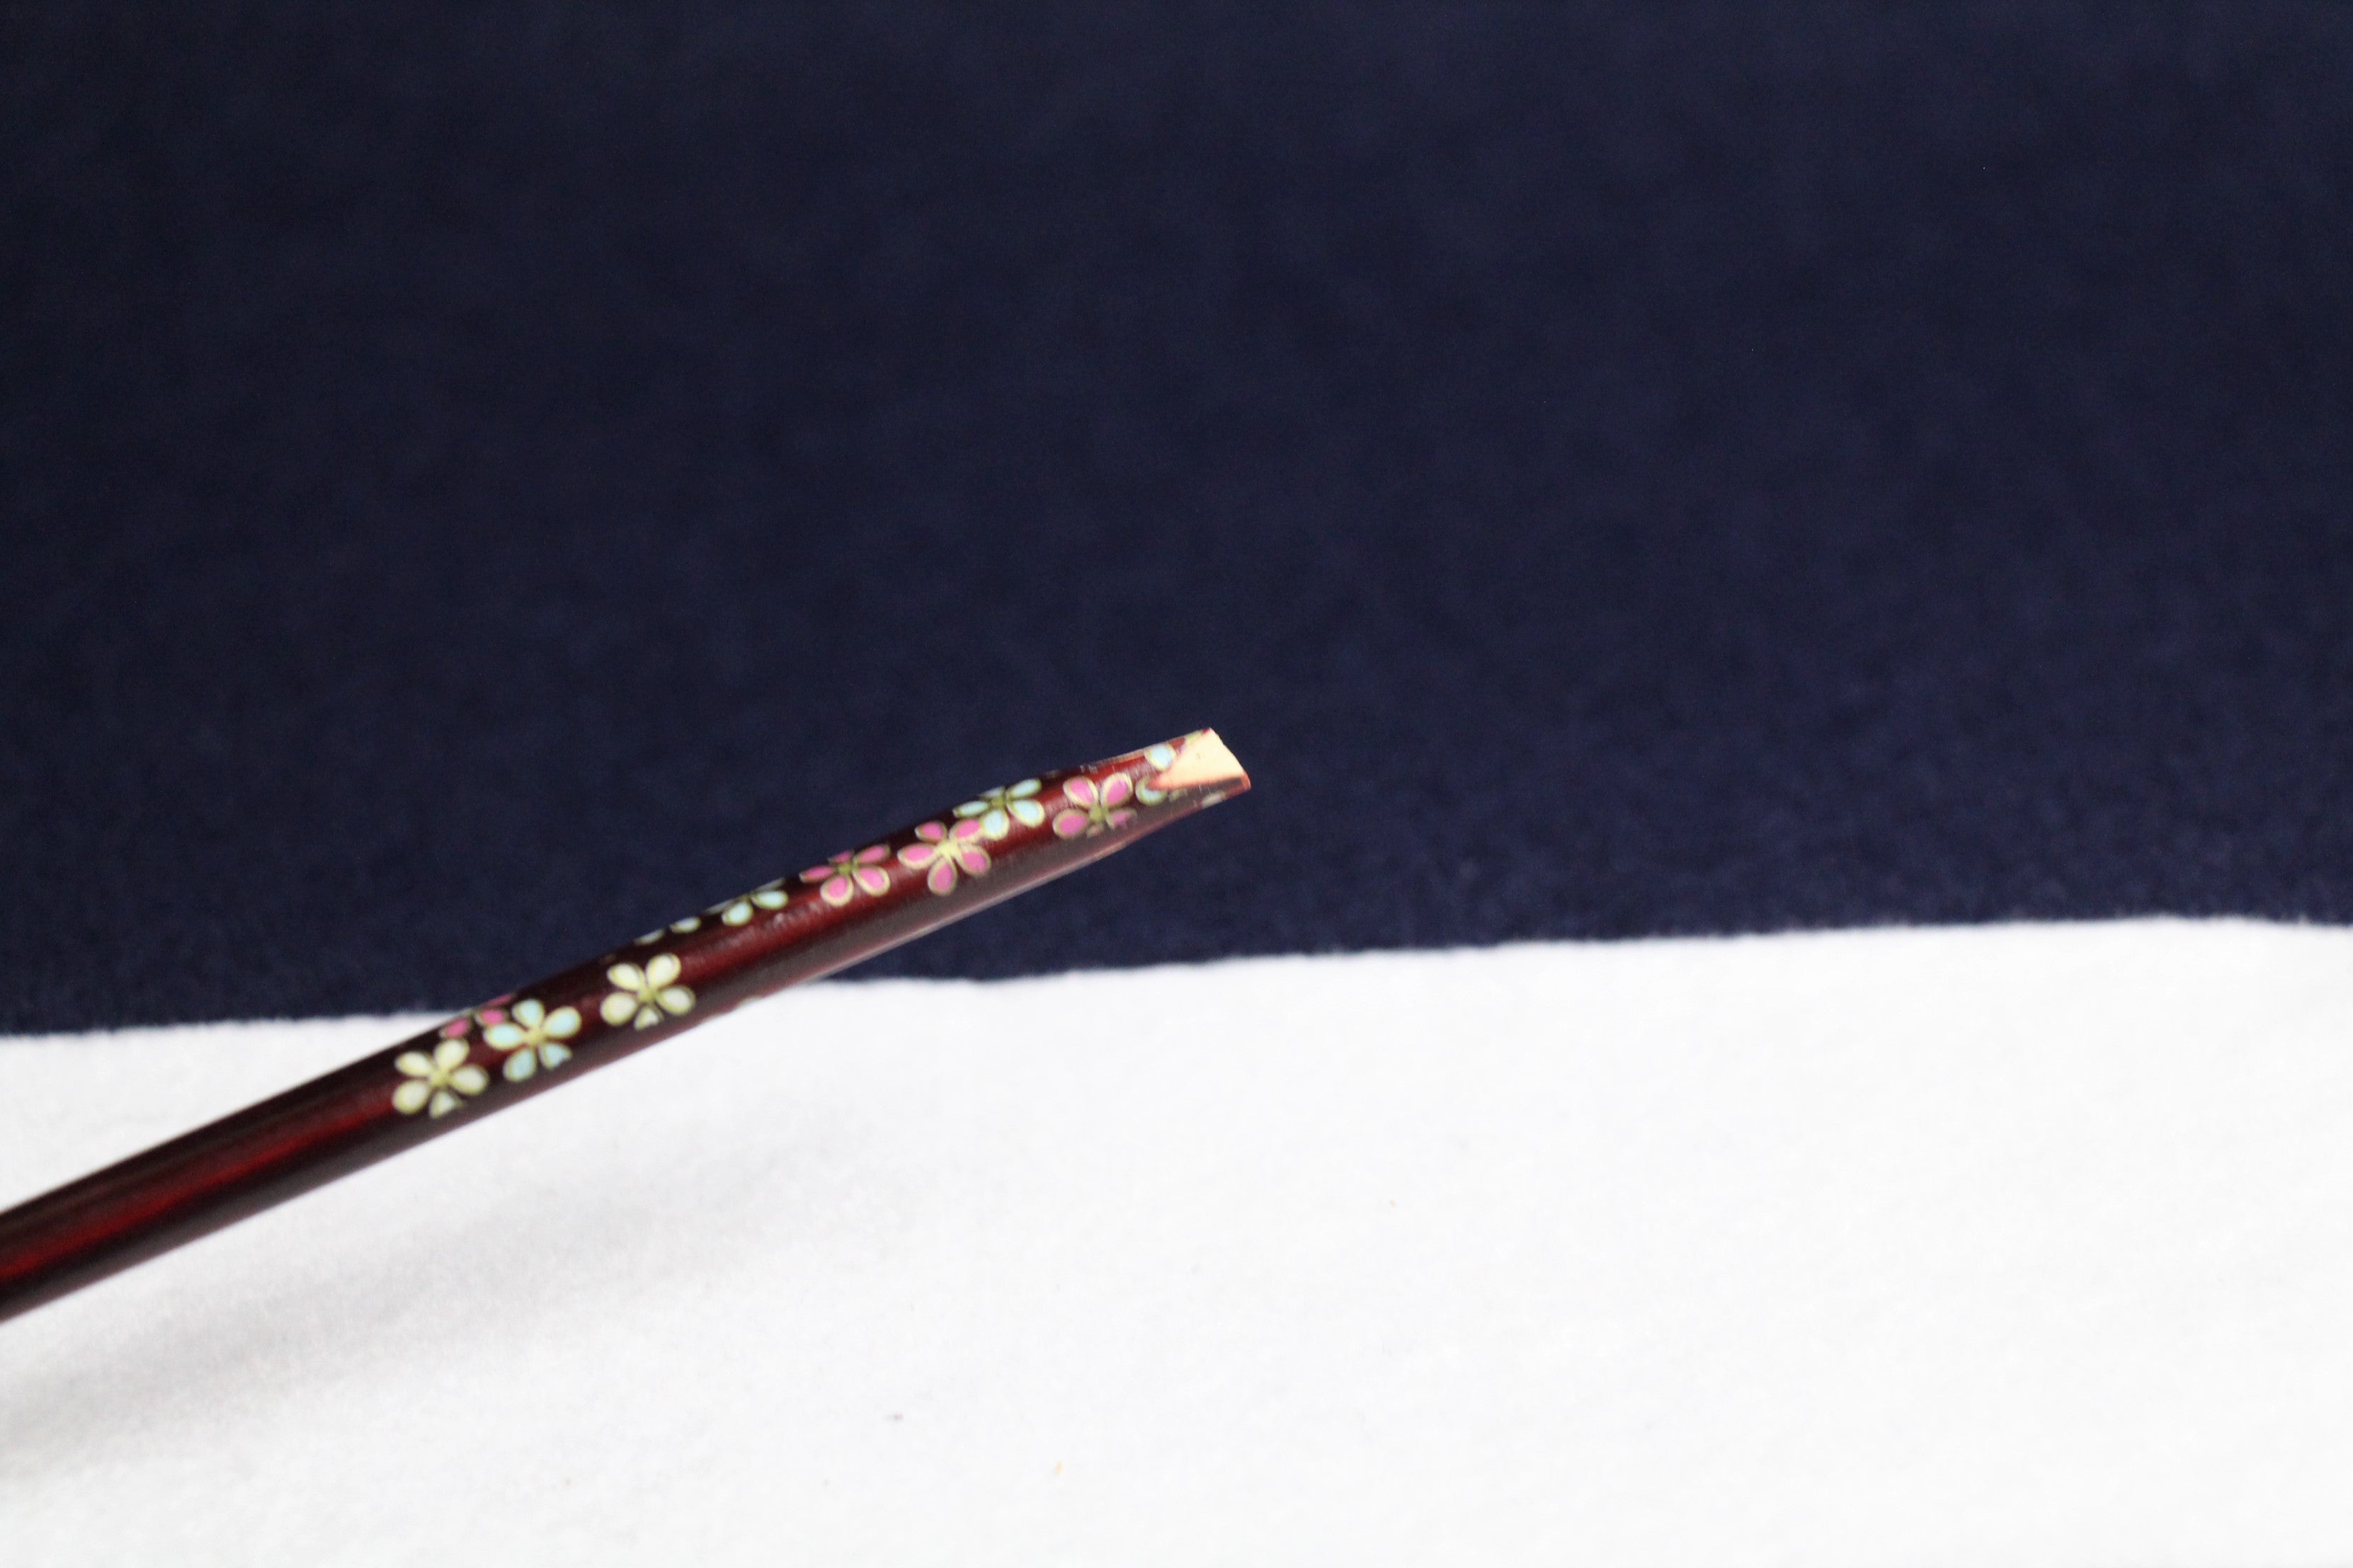 Bamboo qalam pen for Arabic calligraphy with painted flowers